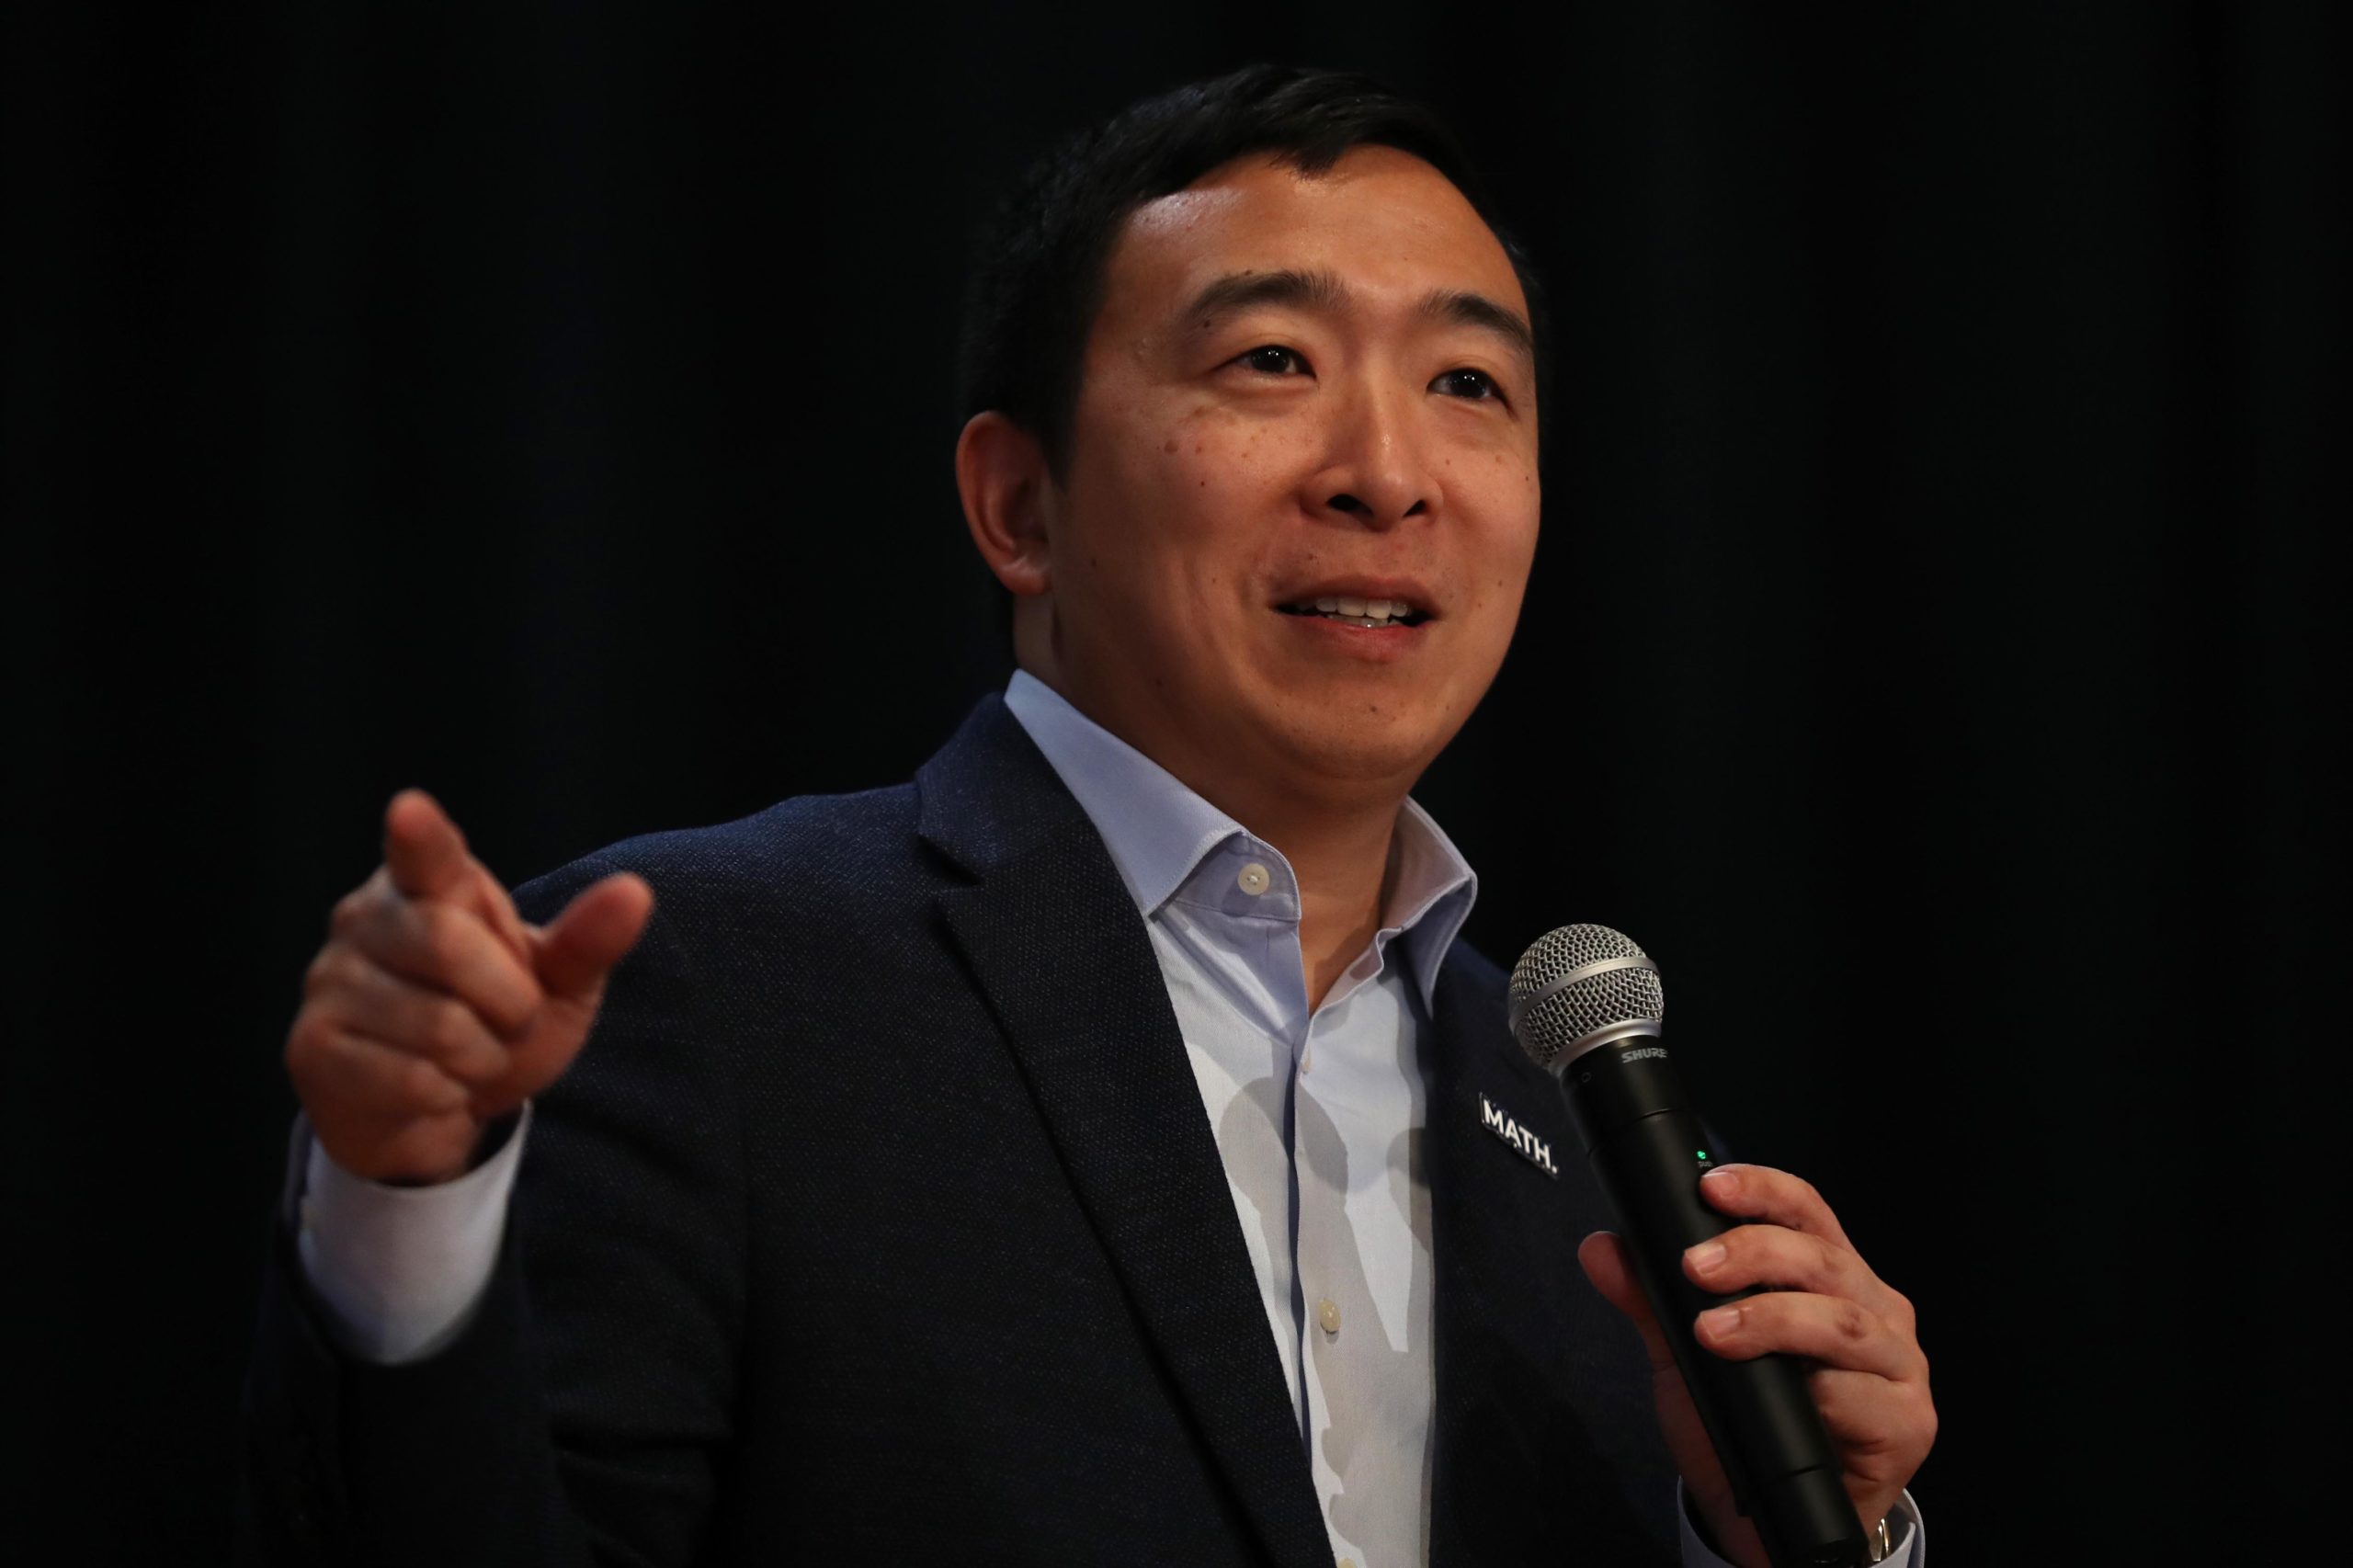 Yang fires dozens of staffers after Iowa debacle